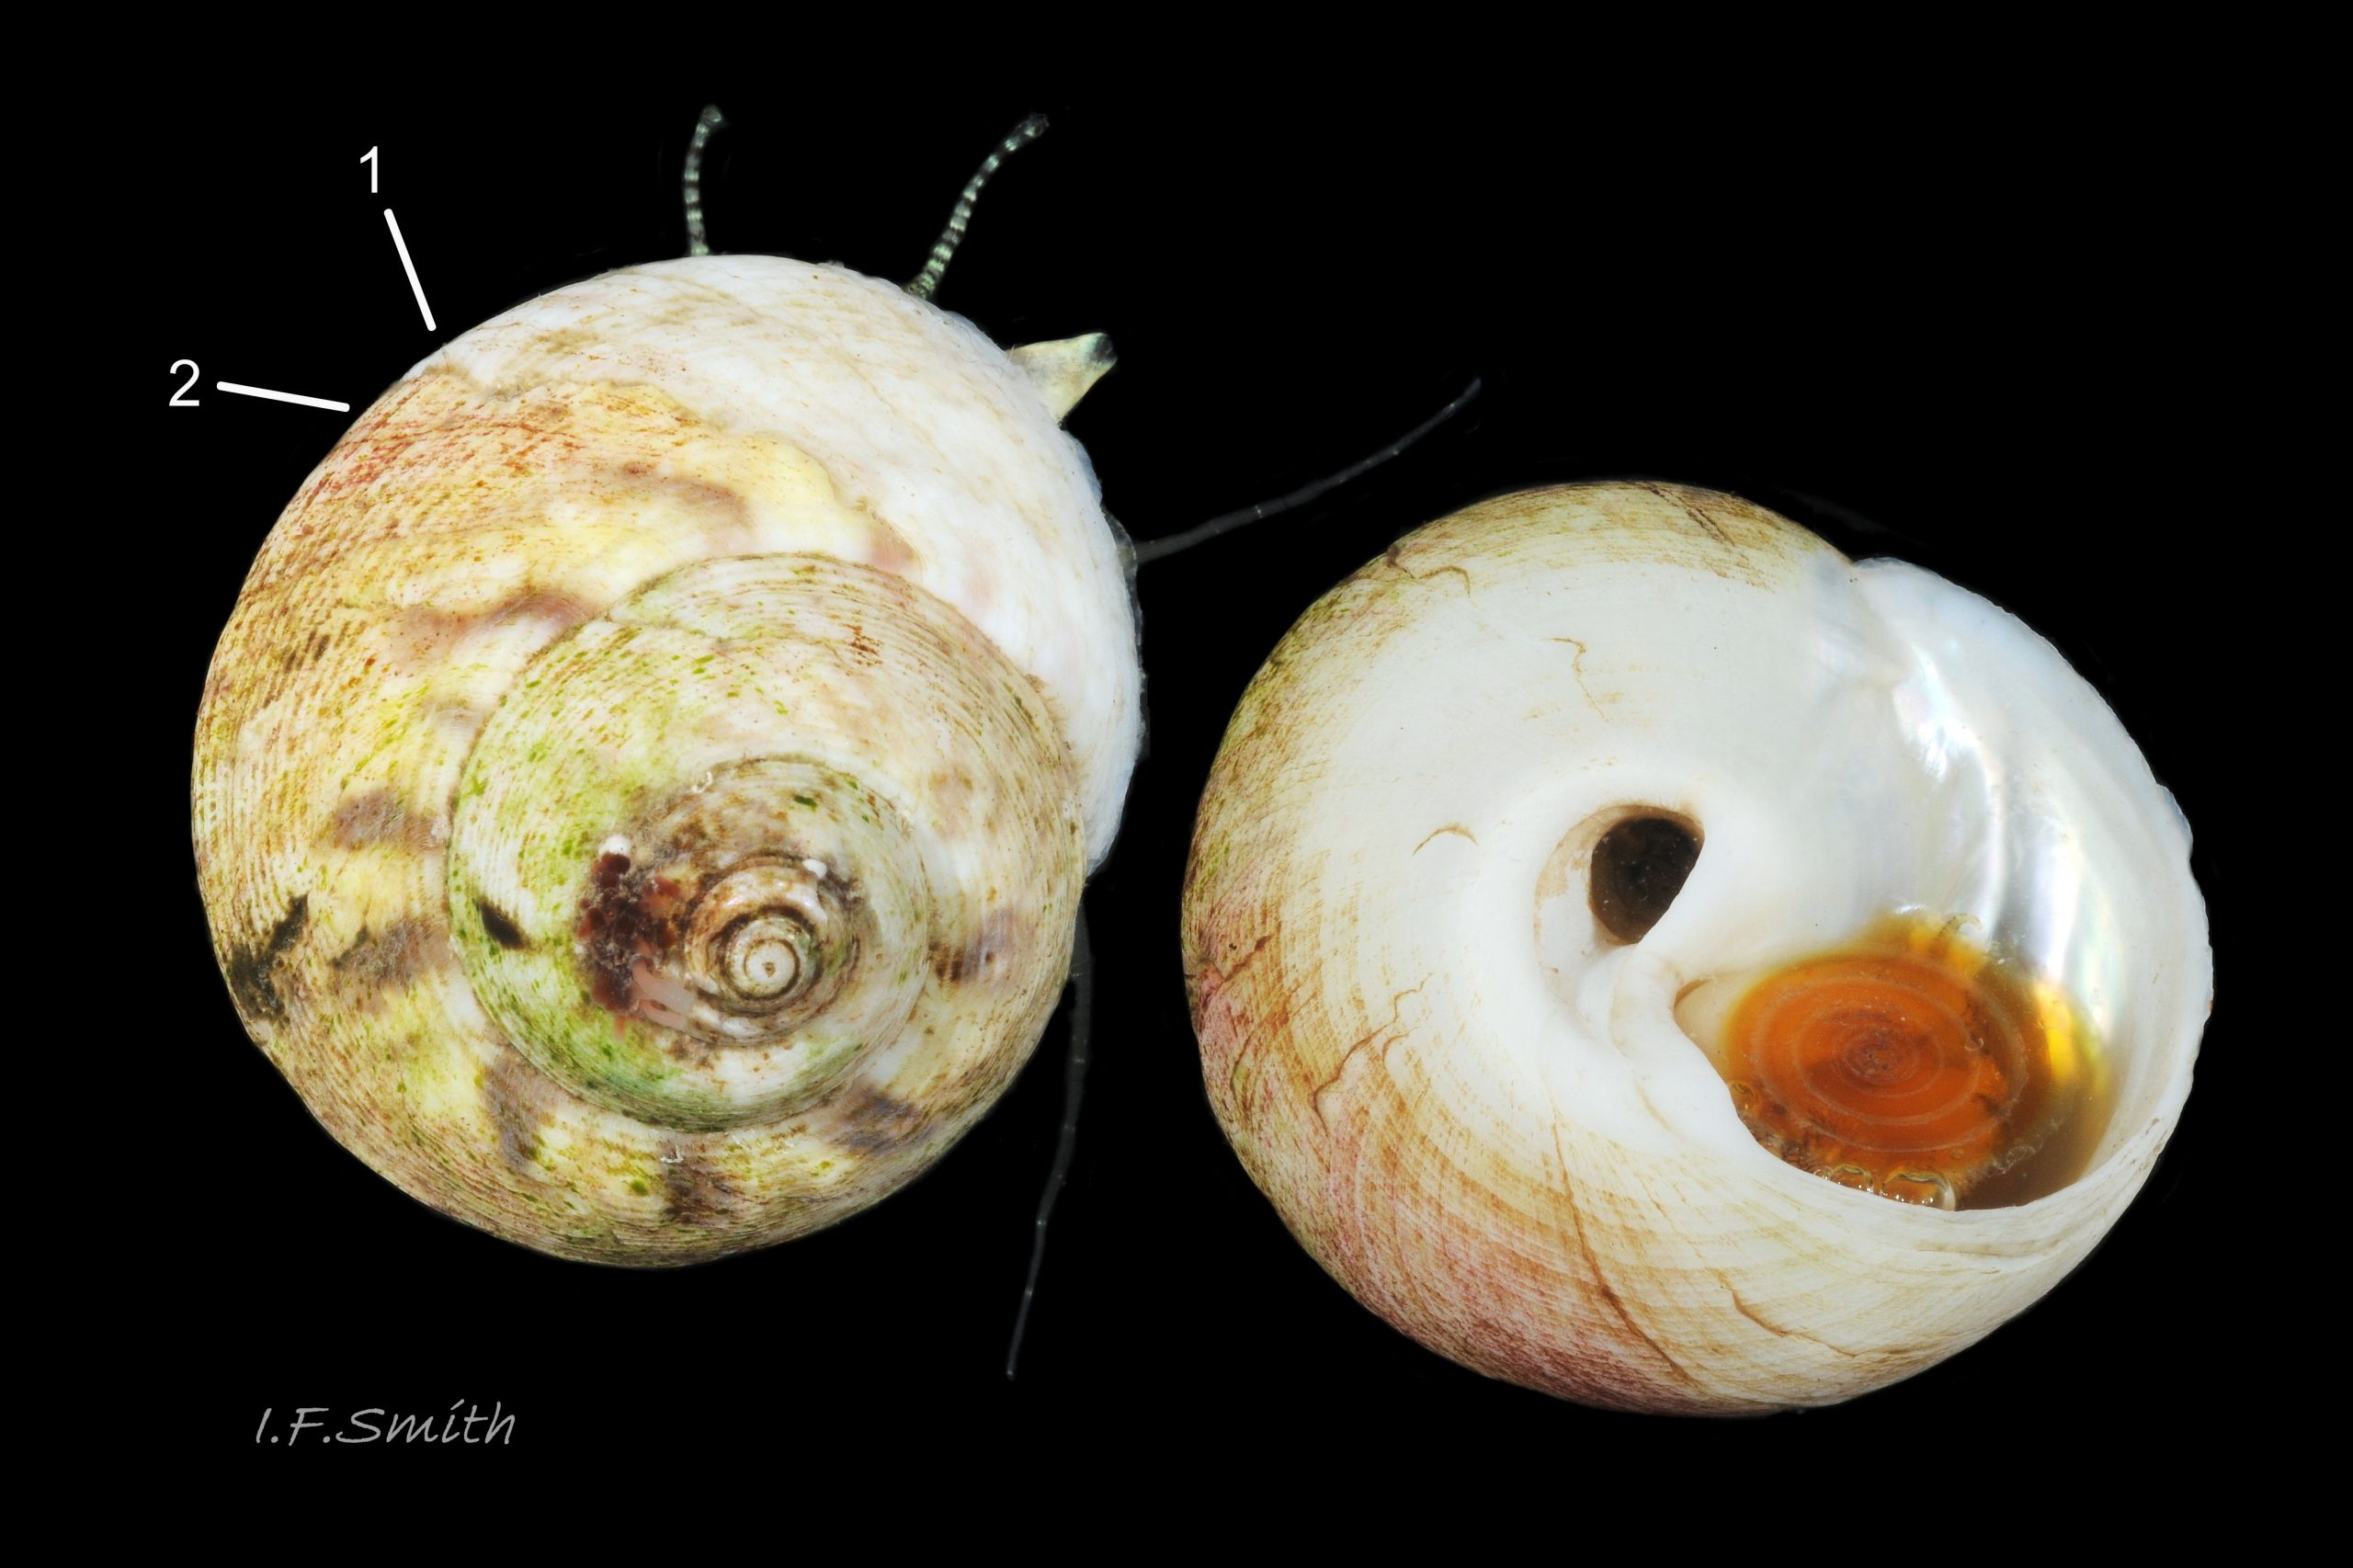 03 Gibbula magus. Height 19.25 mm, breadth 25.5 mm. Cardigan Bay, Wales. 2015.